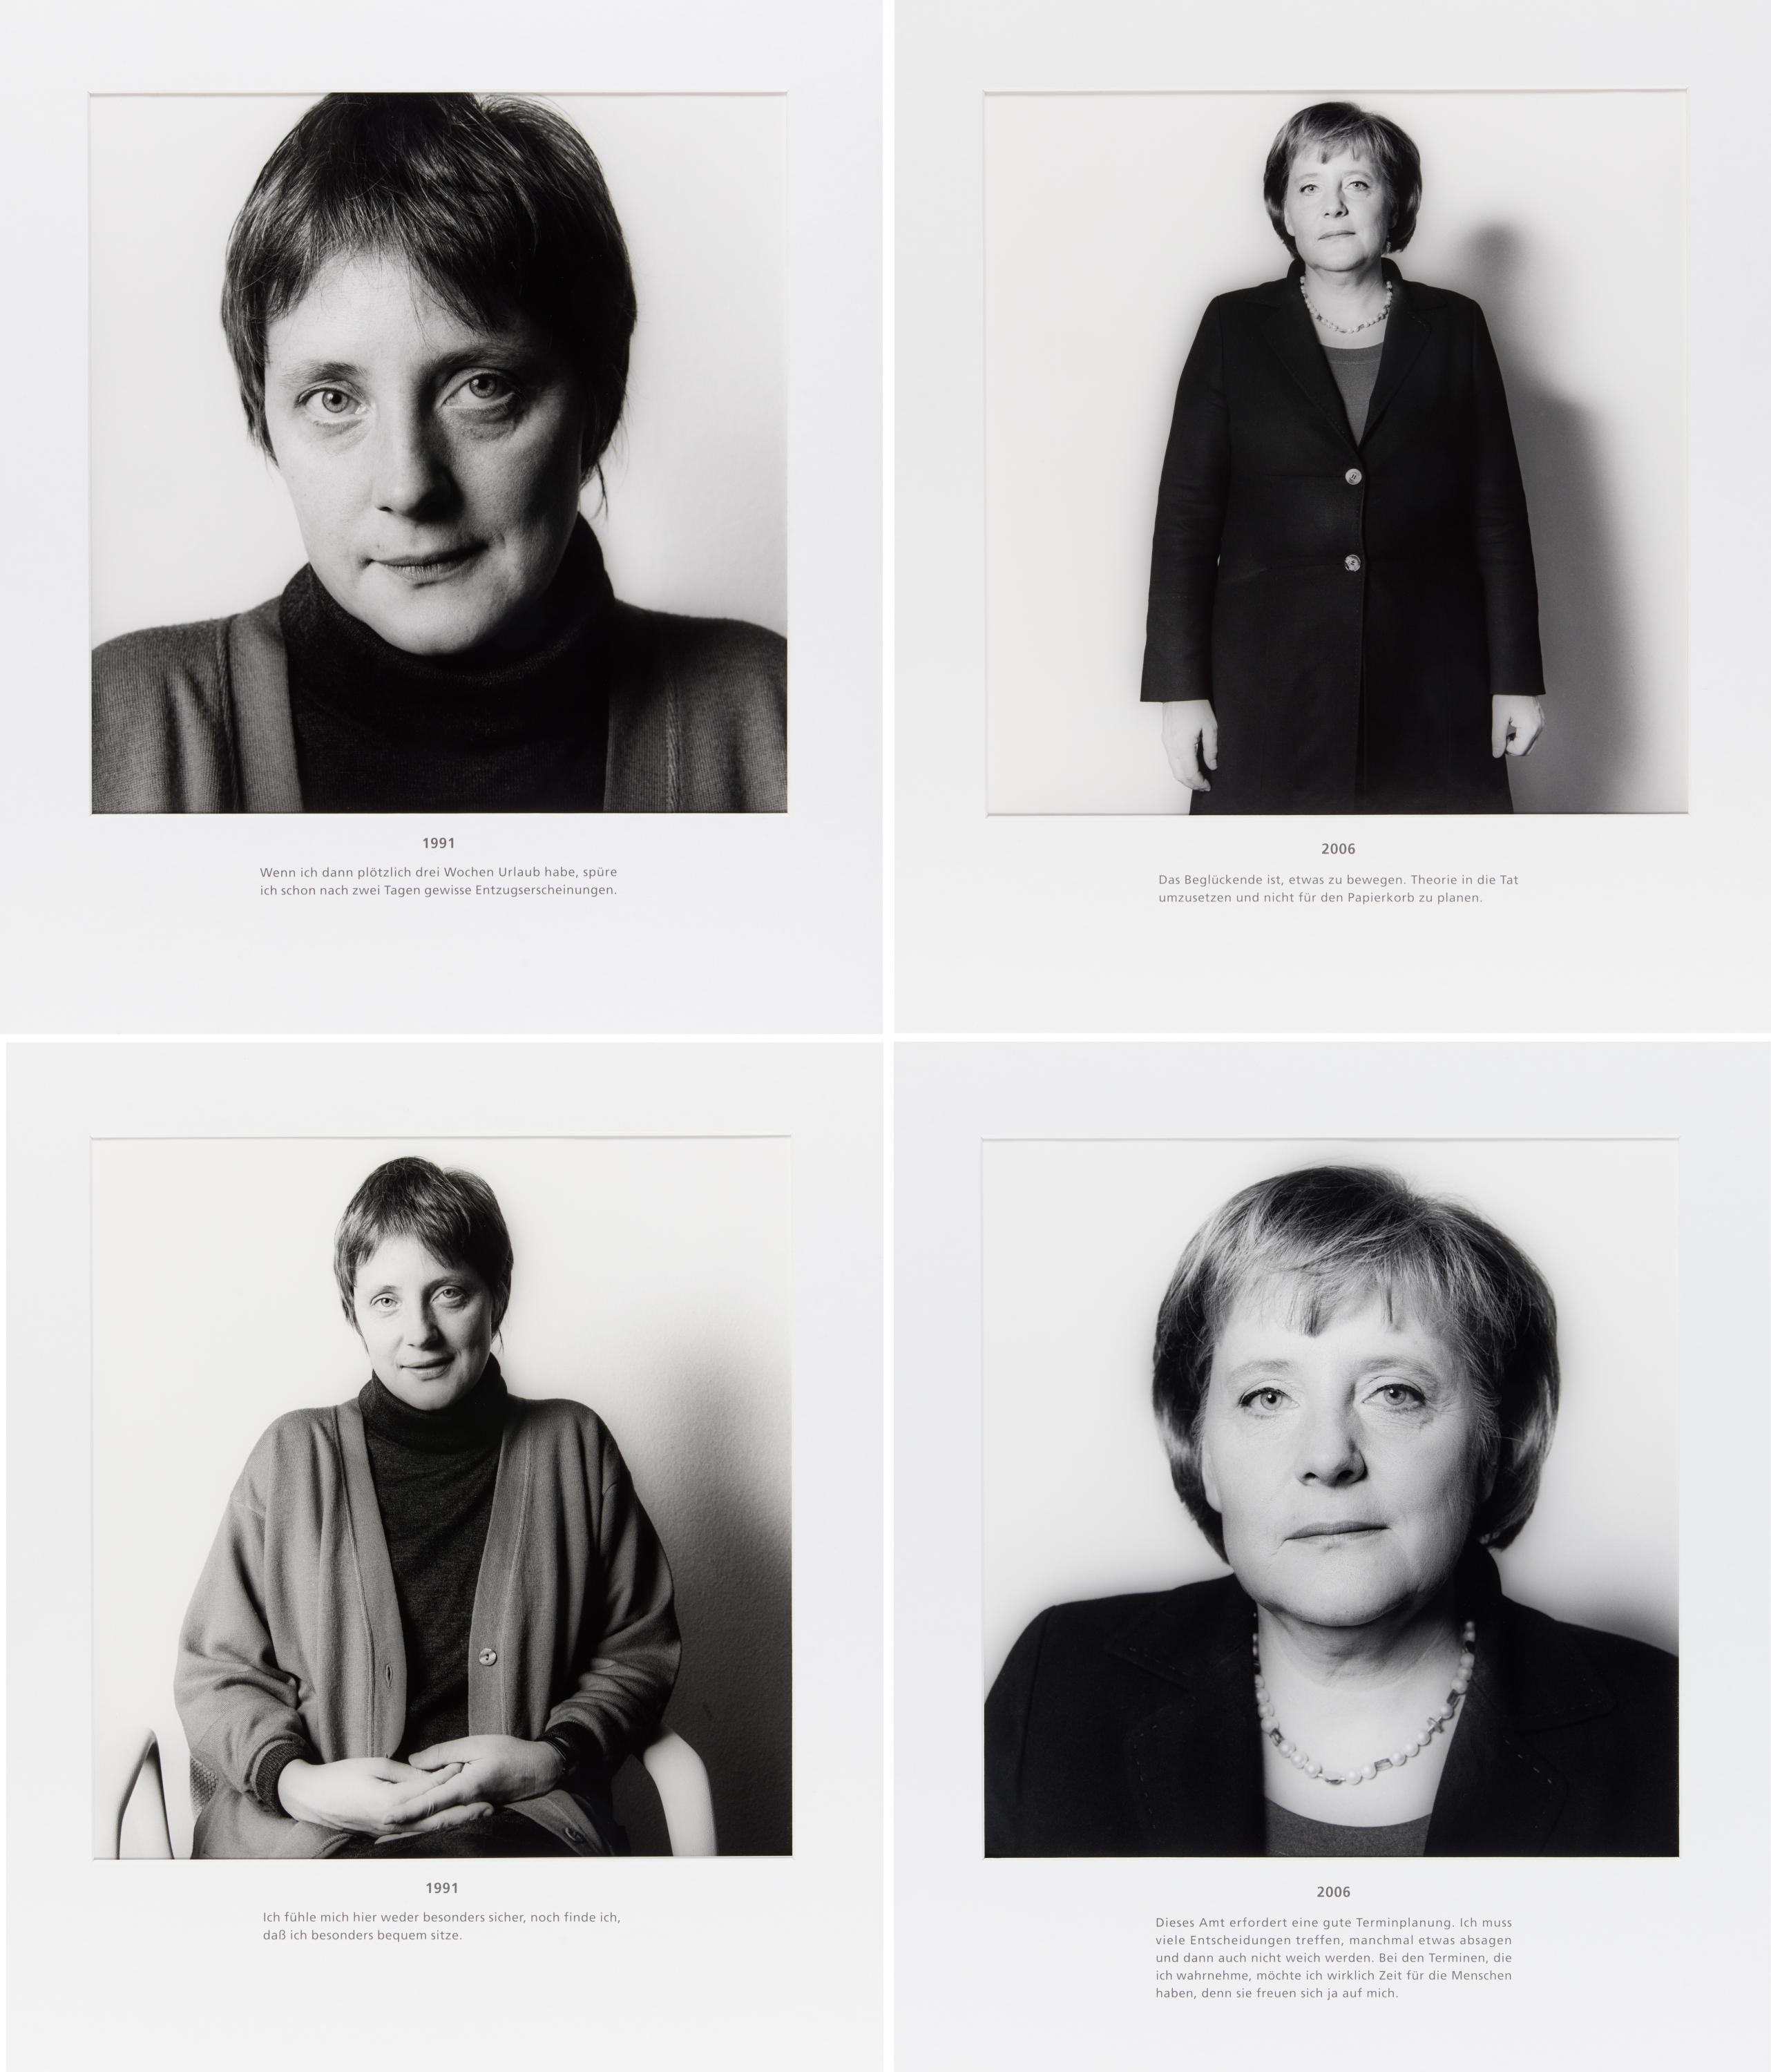 Angela Merkel. From the series: Traces of Power by Herlinde Koelbl, Circa 1991-2006